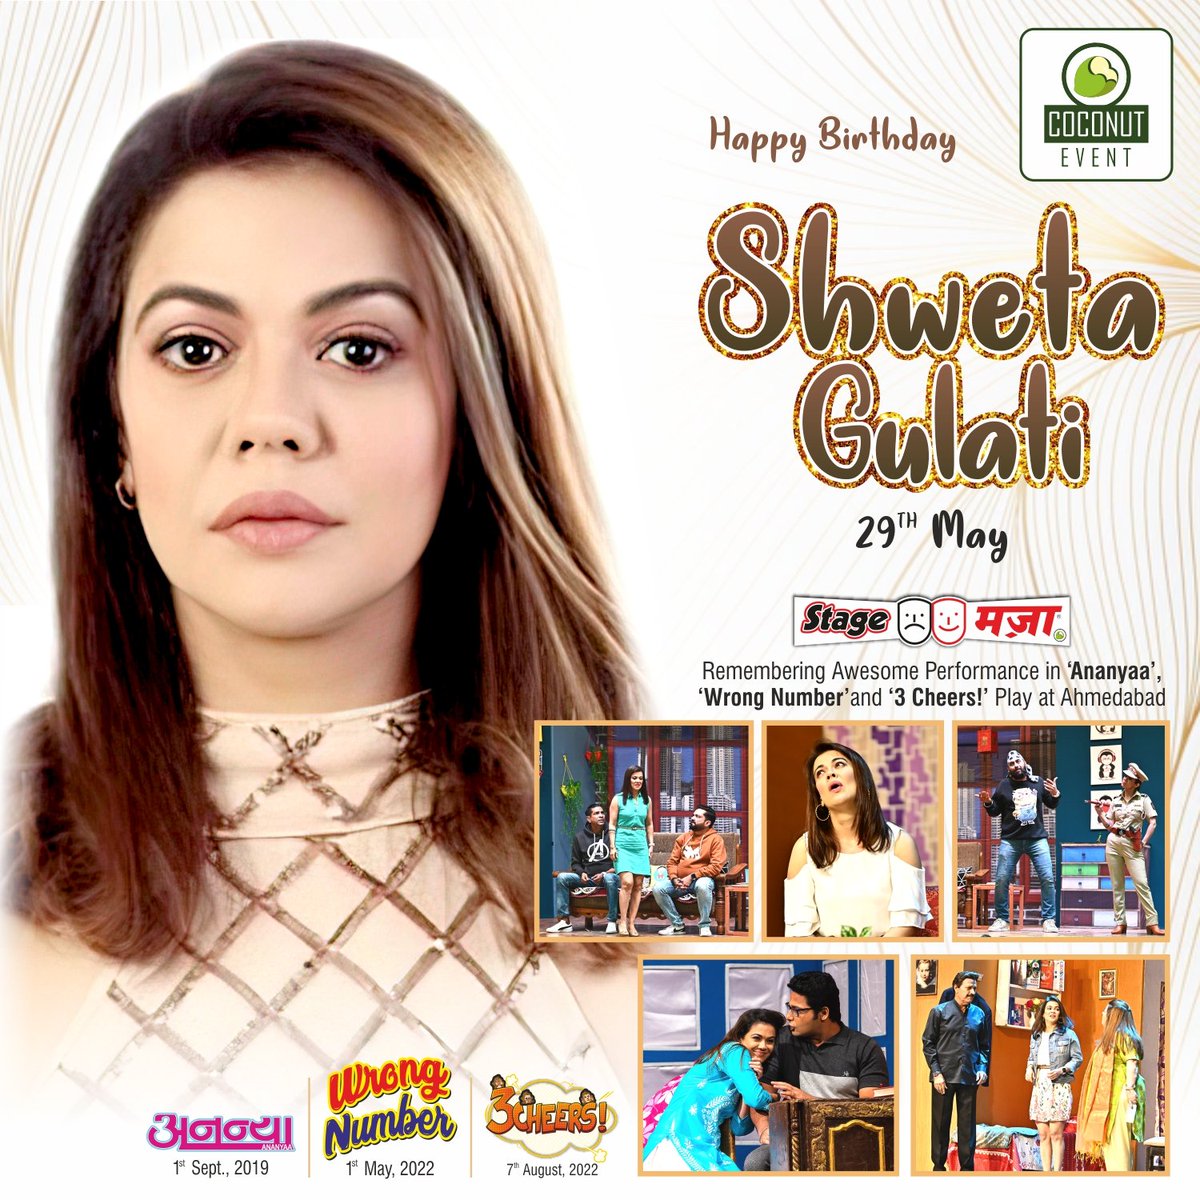 Wishing a #HappyBirthday to #ShwetaGulati May your day be filled with the same joy and excitement you bring to everyone. With heartfelt wishes from #CoconutEvent and #StageMazaa.

#BirthdayWishes #RashminMajithia #Actress #HBD #BDay #HappyBirthdayToYou